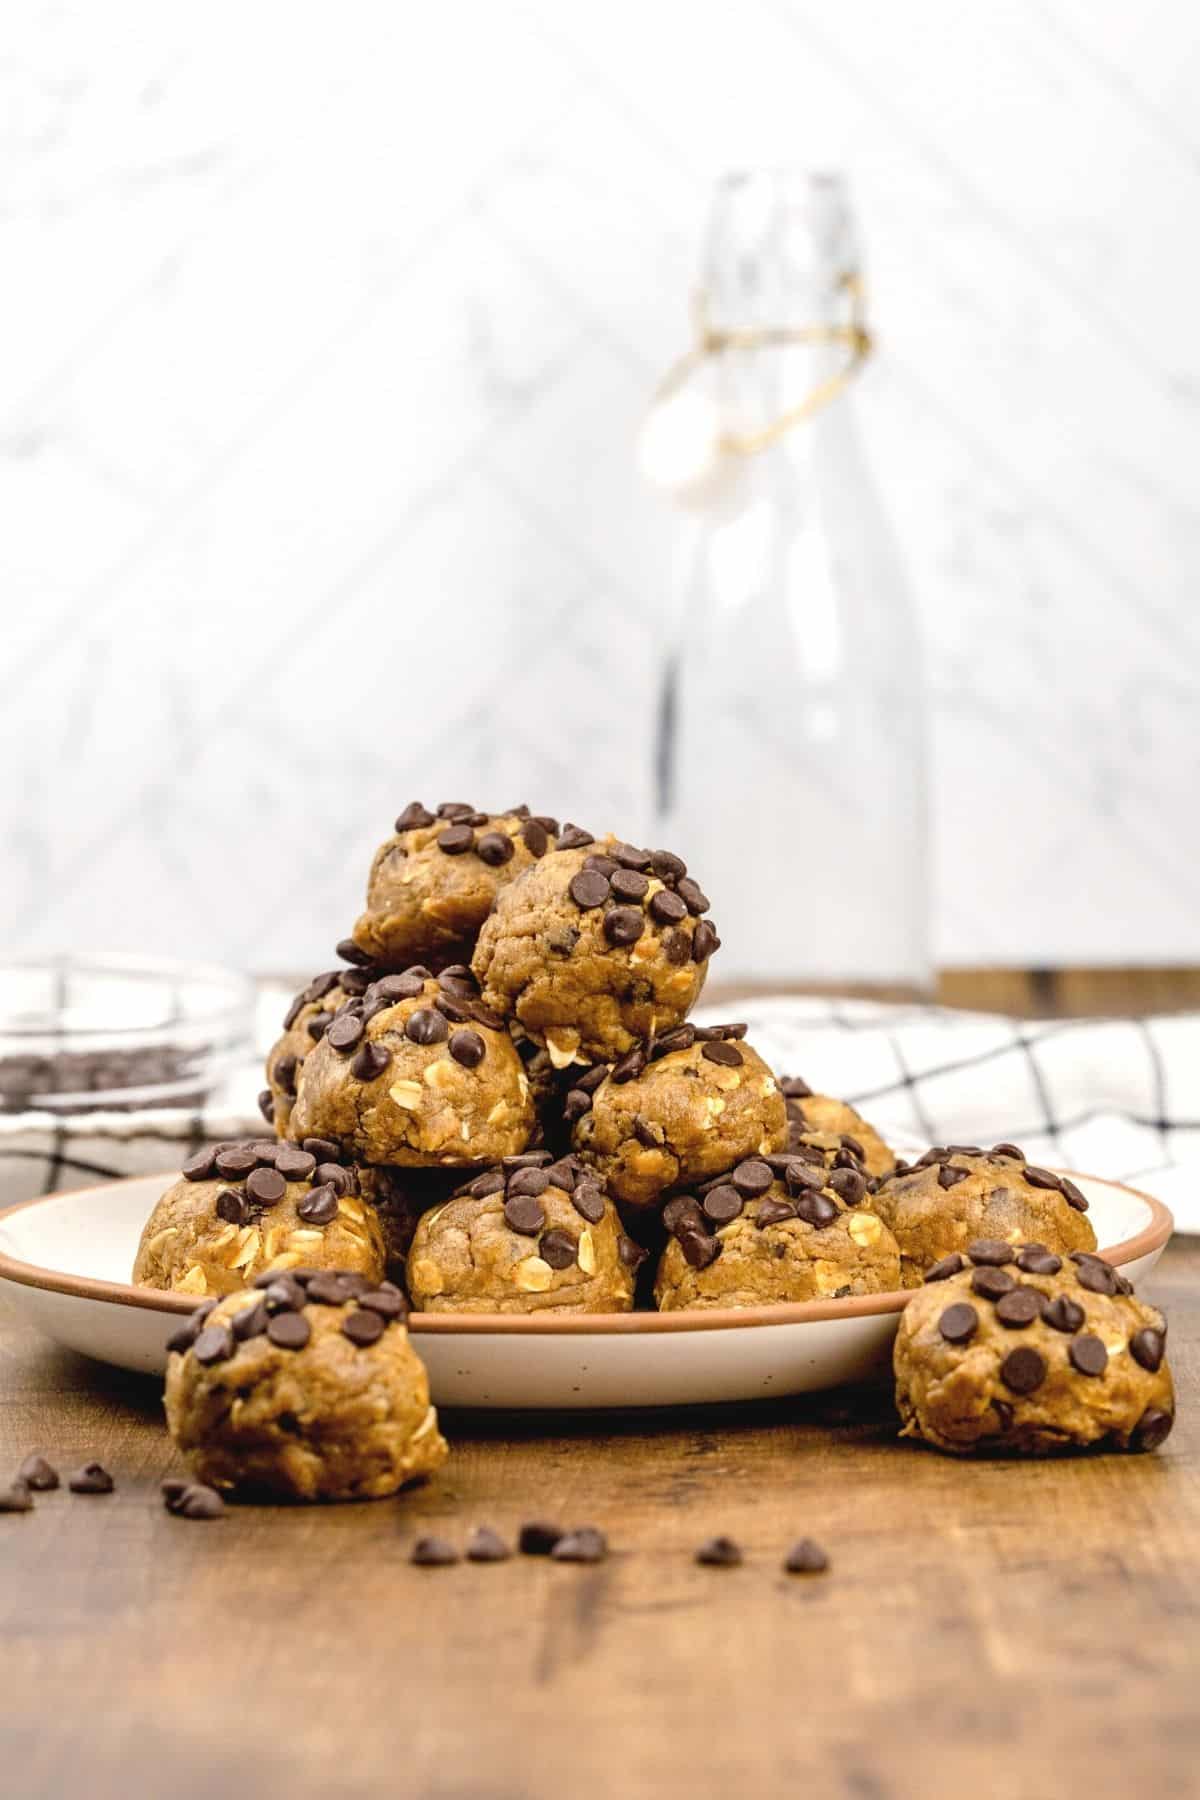 A pile of no bake chocolate chip cookie dough balls on a beige plate on a wood table in the kitchen. A towel and glass jar are blurred in the background. Mini chocolate chips are sprinkled around.